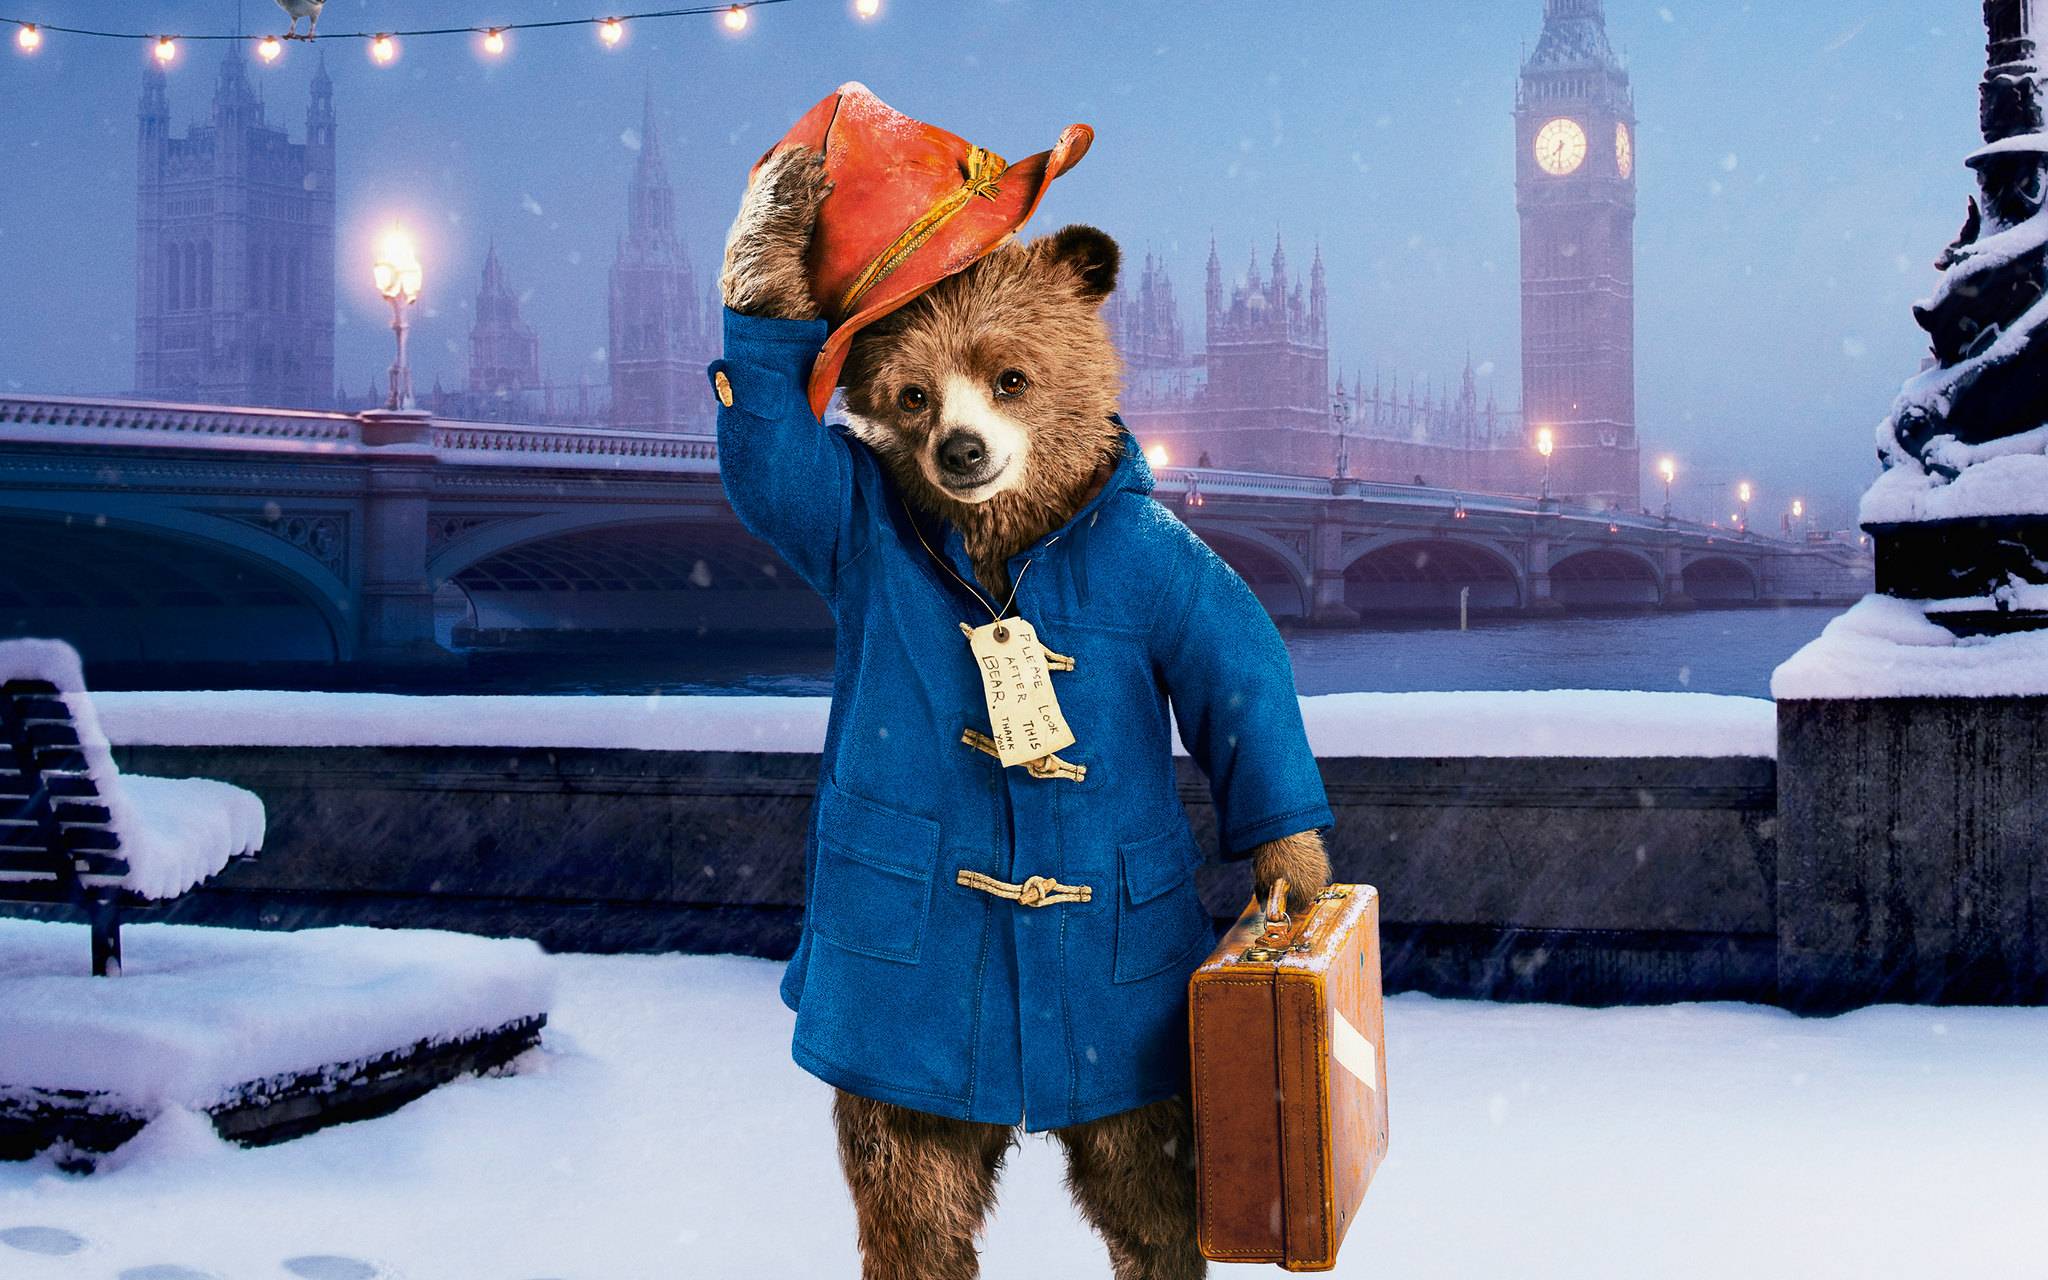 A new exhibition about Paddington Bear - London Airport Transfers